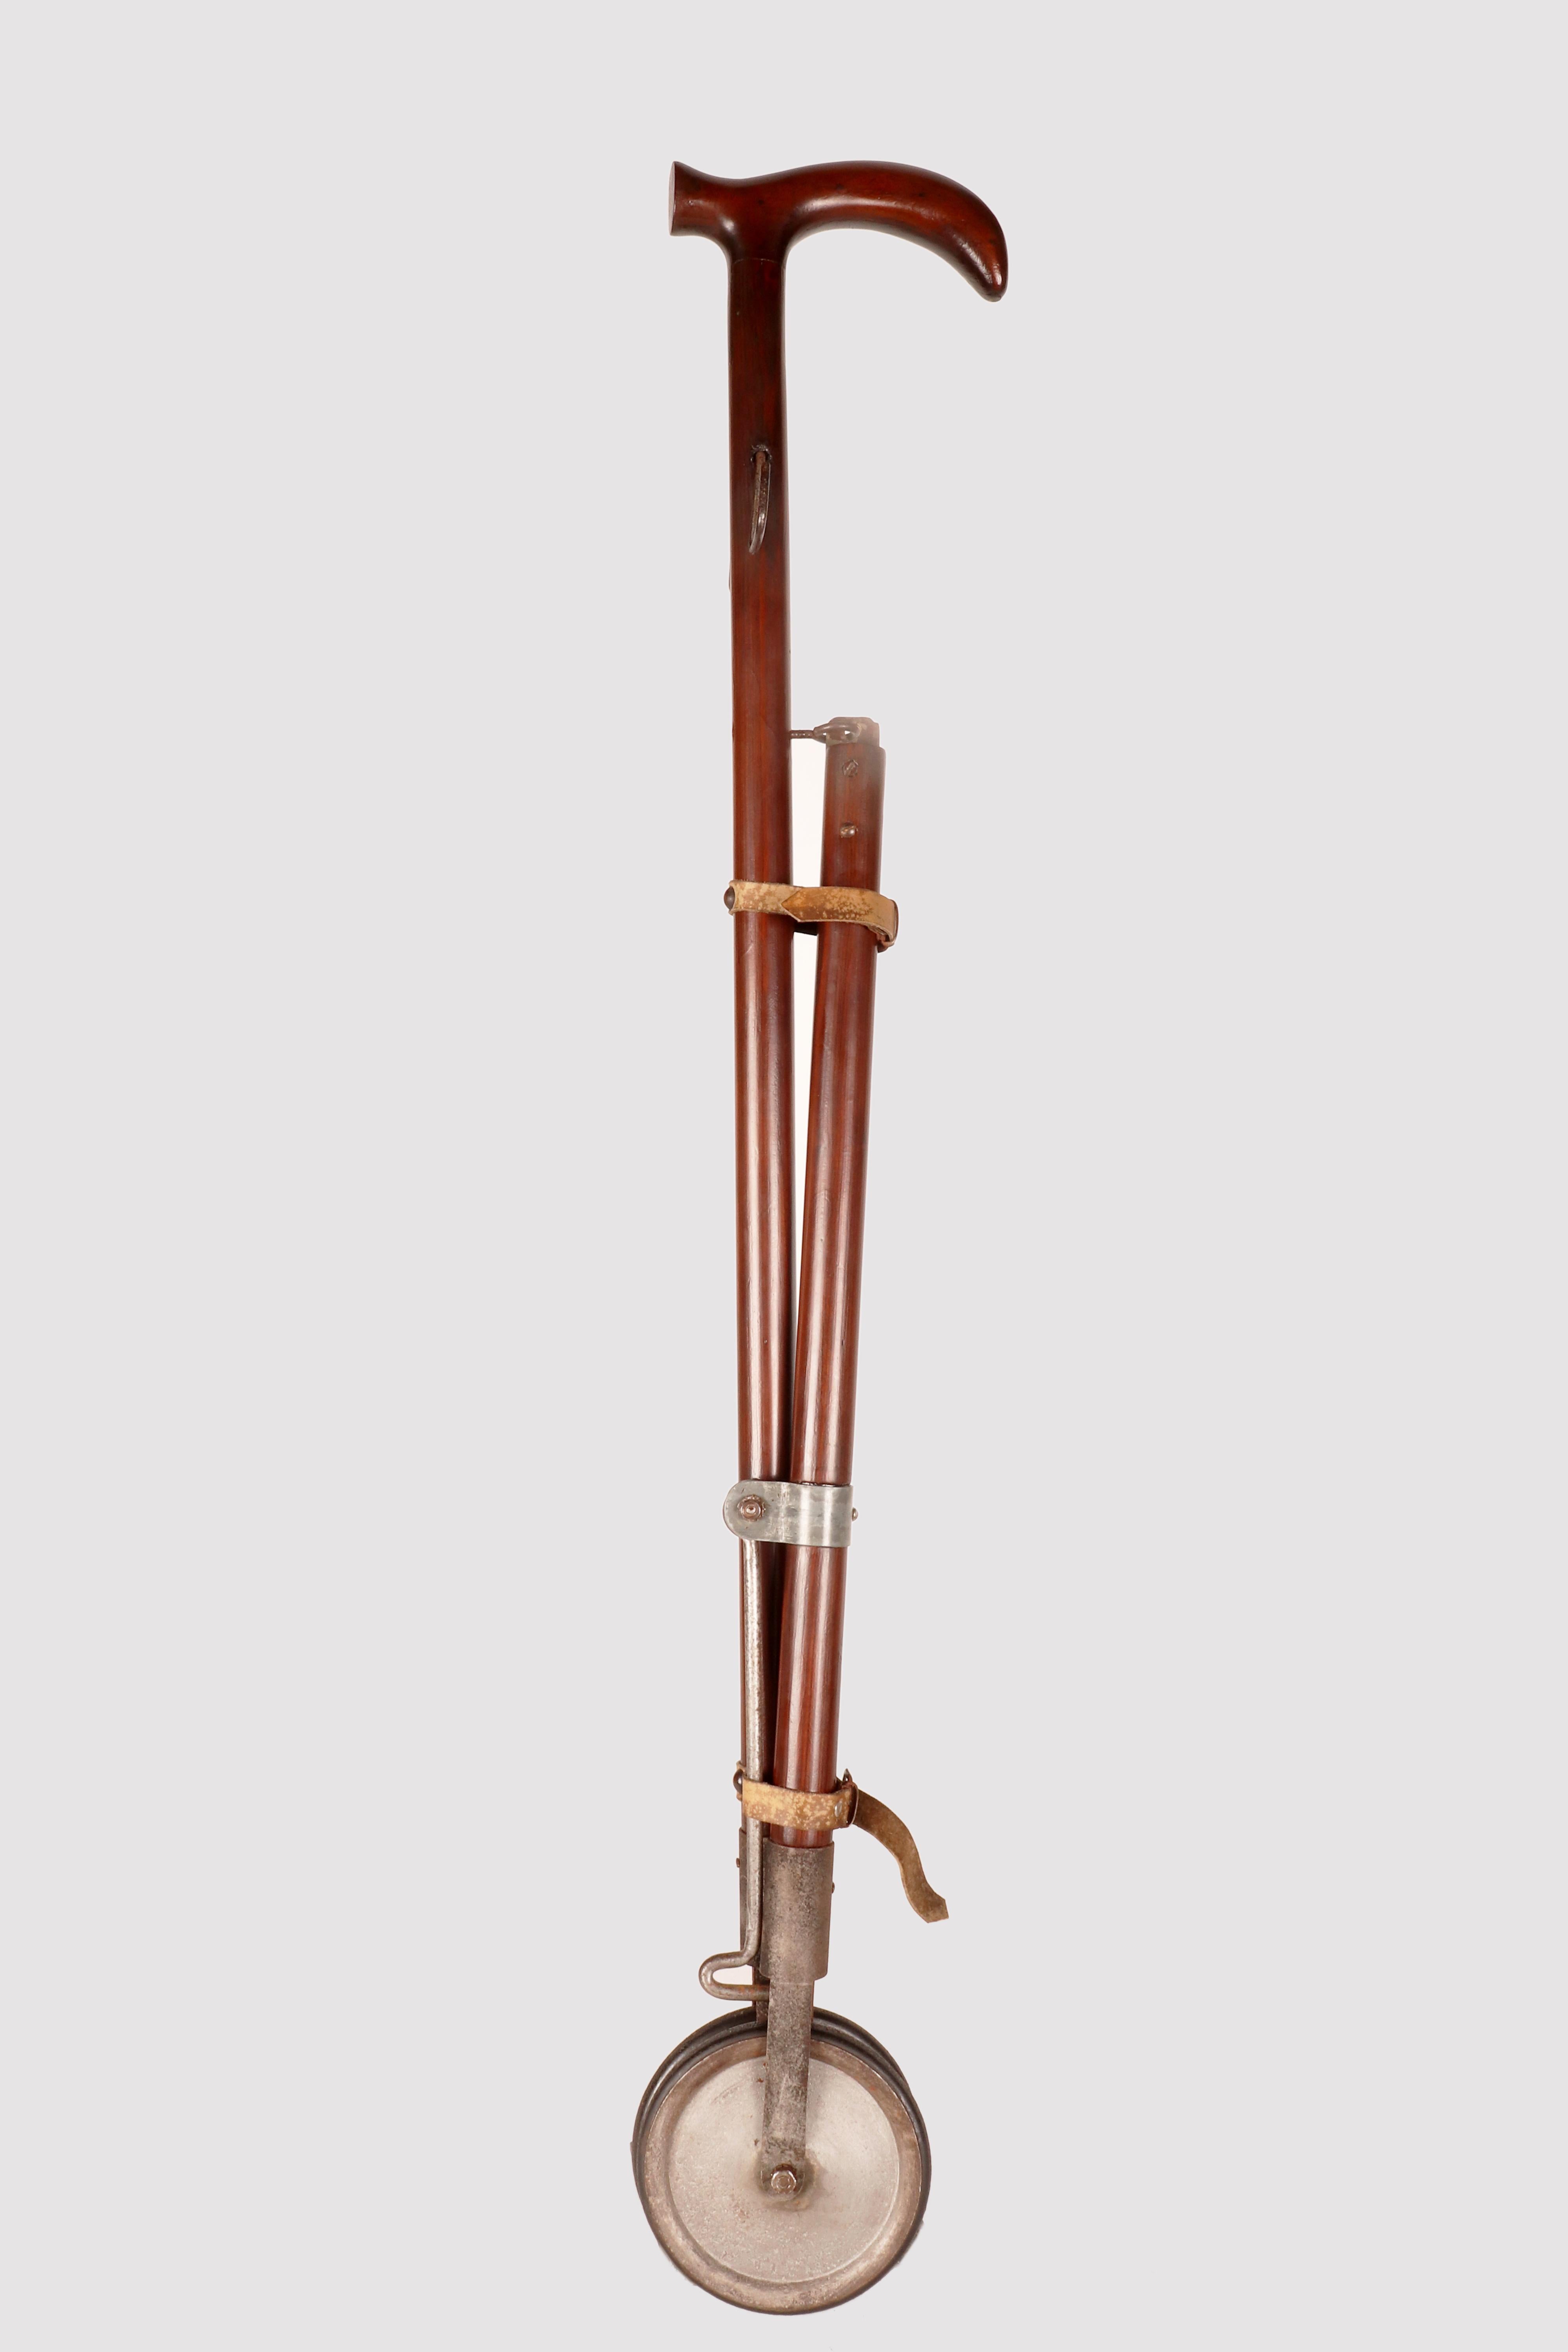 Gadget-System cane: cane with bag holder function. Curious stick used to carry shopping bags, made with two upside-down V-shaped fruitwooden shafts, ending with two small iron and rubber wheels. Under the handle there are two hooks (one on the right